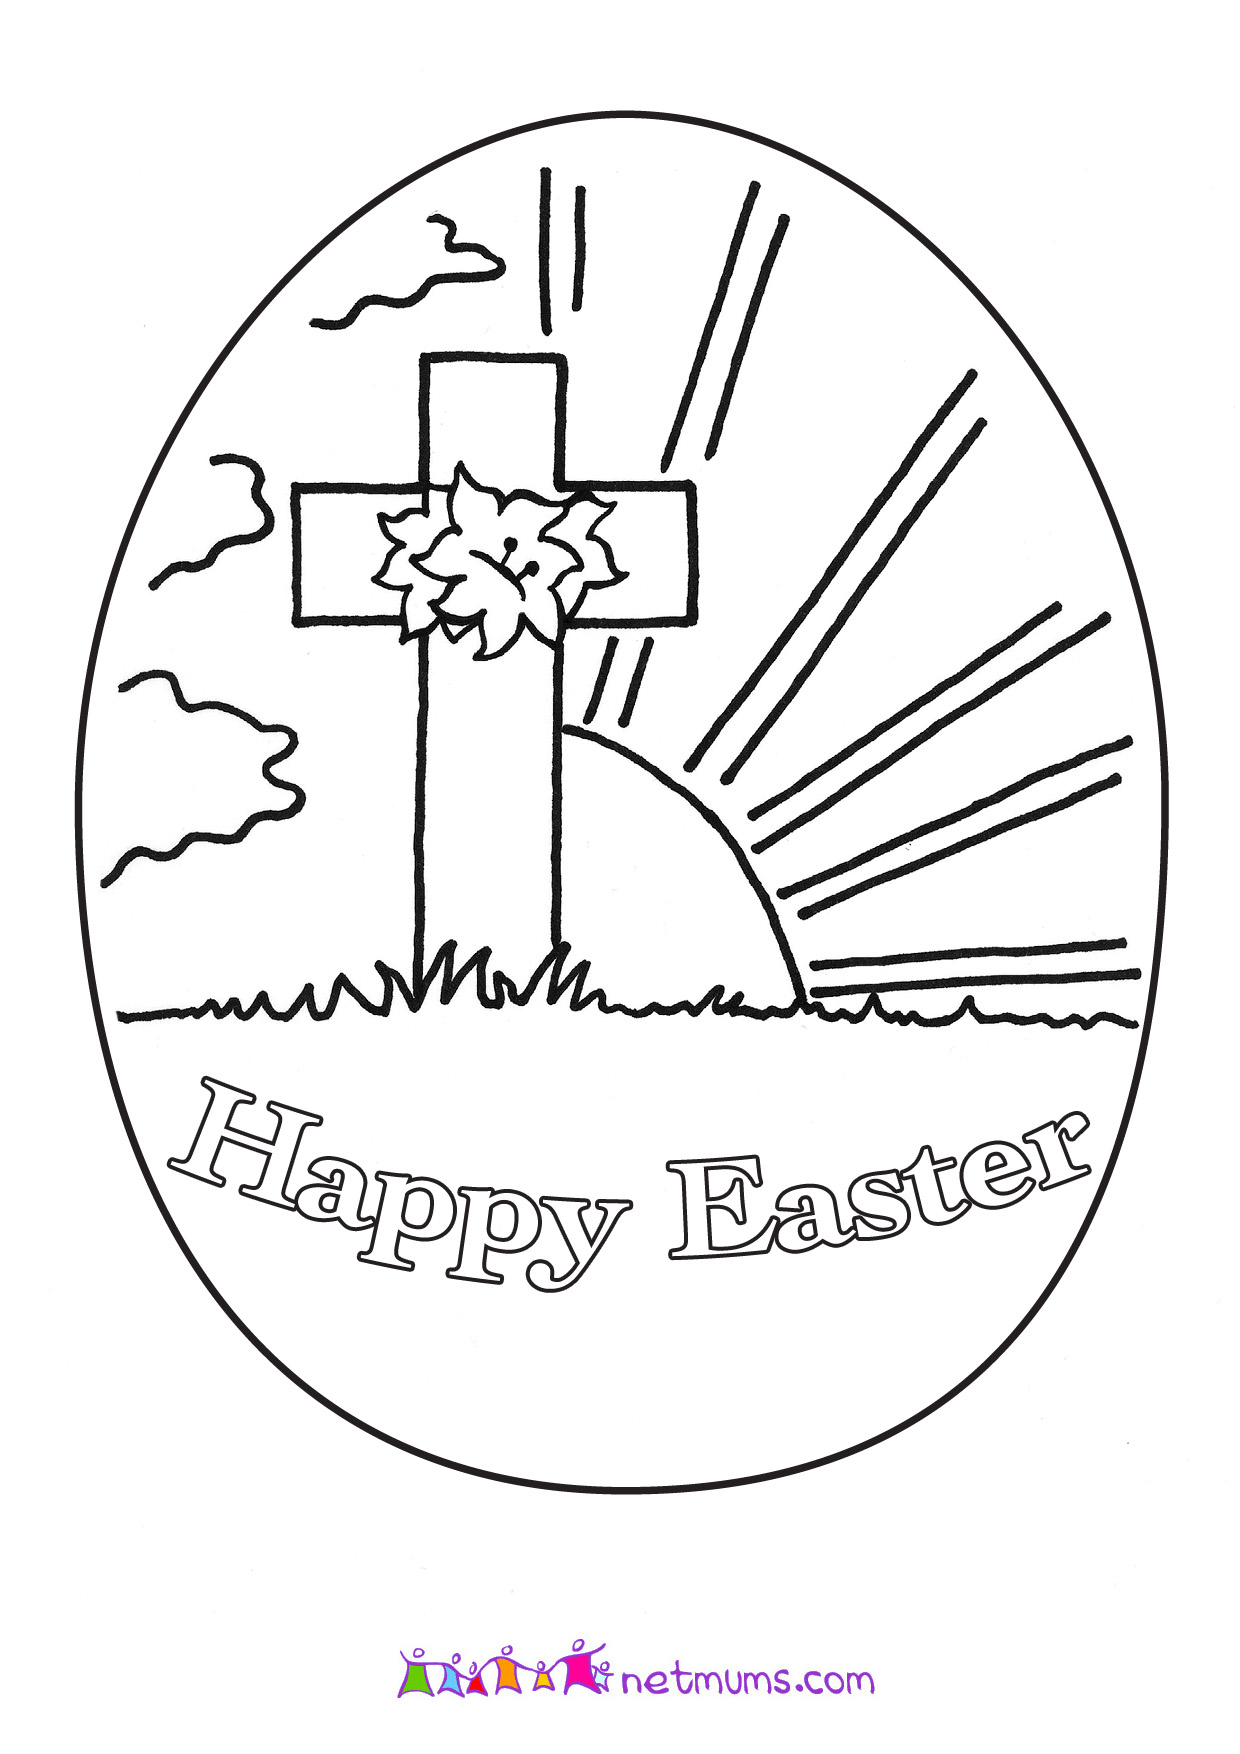 Free Printable Religious Easter Coloring Pages At GetDrawings Free Download